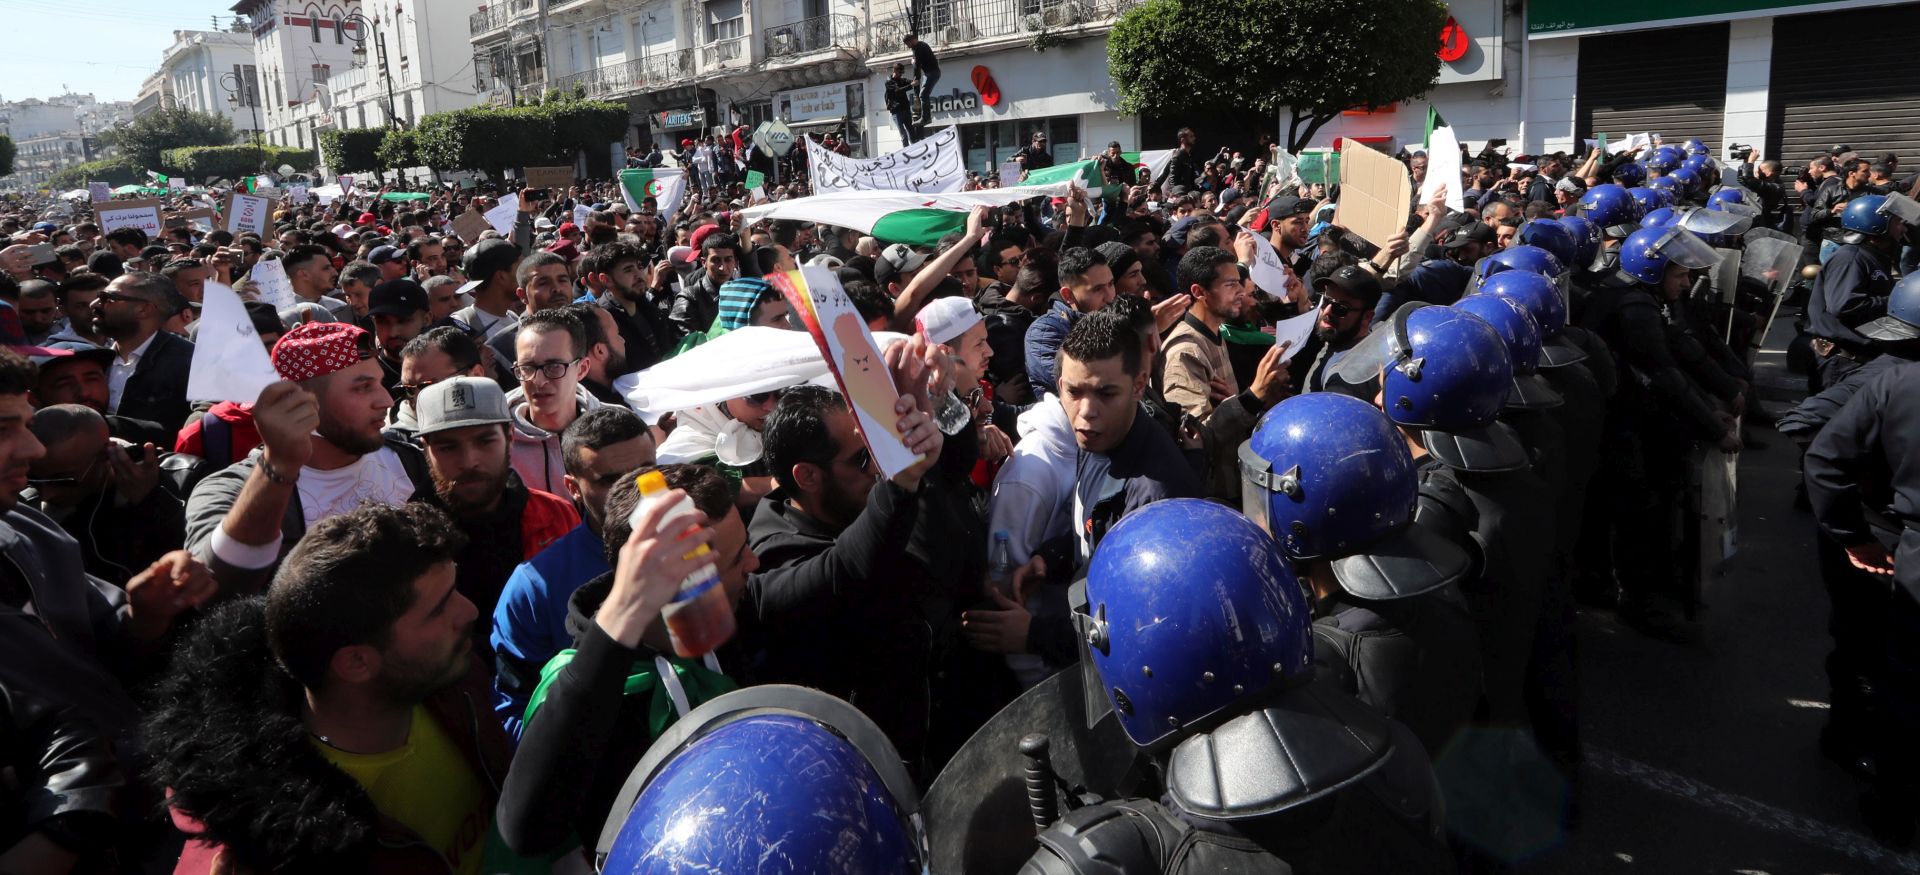 epa07406585 Algerian protesters chant slogans during a protest against the fifth term of Abdelaziz Bouteflika in Algiers, Algeria, 01 March 2019. Algerian authorities on 01 March braced for what are expected to be the largest protests in the Algerian capital in over a decade. Several protests and rallies were held in Algeria since Bouteflika serving as the president since 1999, announced he will be running for a fifth term in presidential elections scheduled for 18 April 2019.  EPA/MOHAMED MESSARA